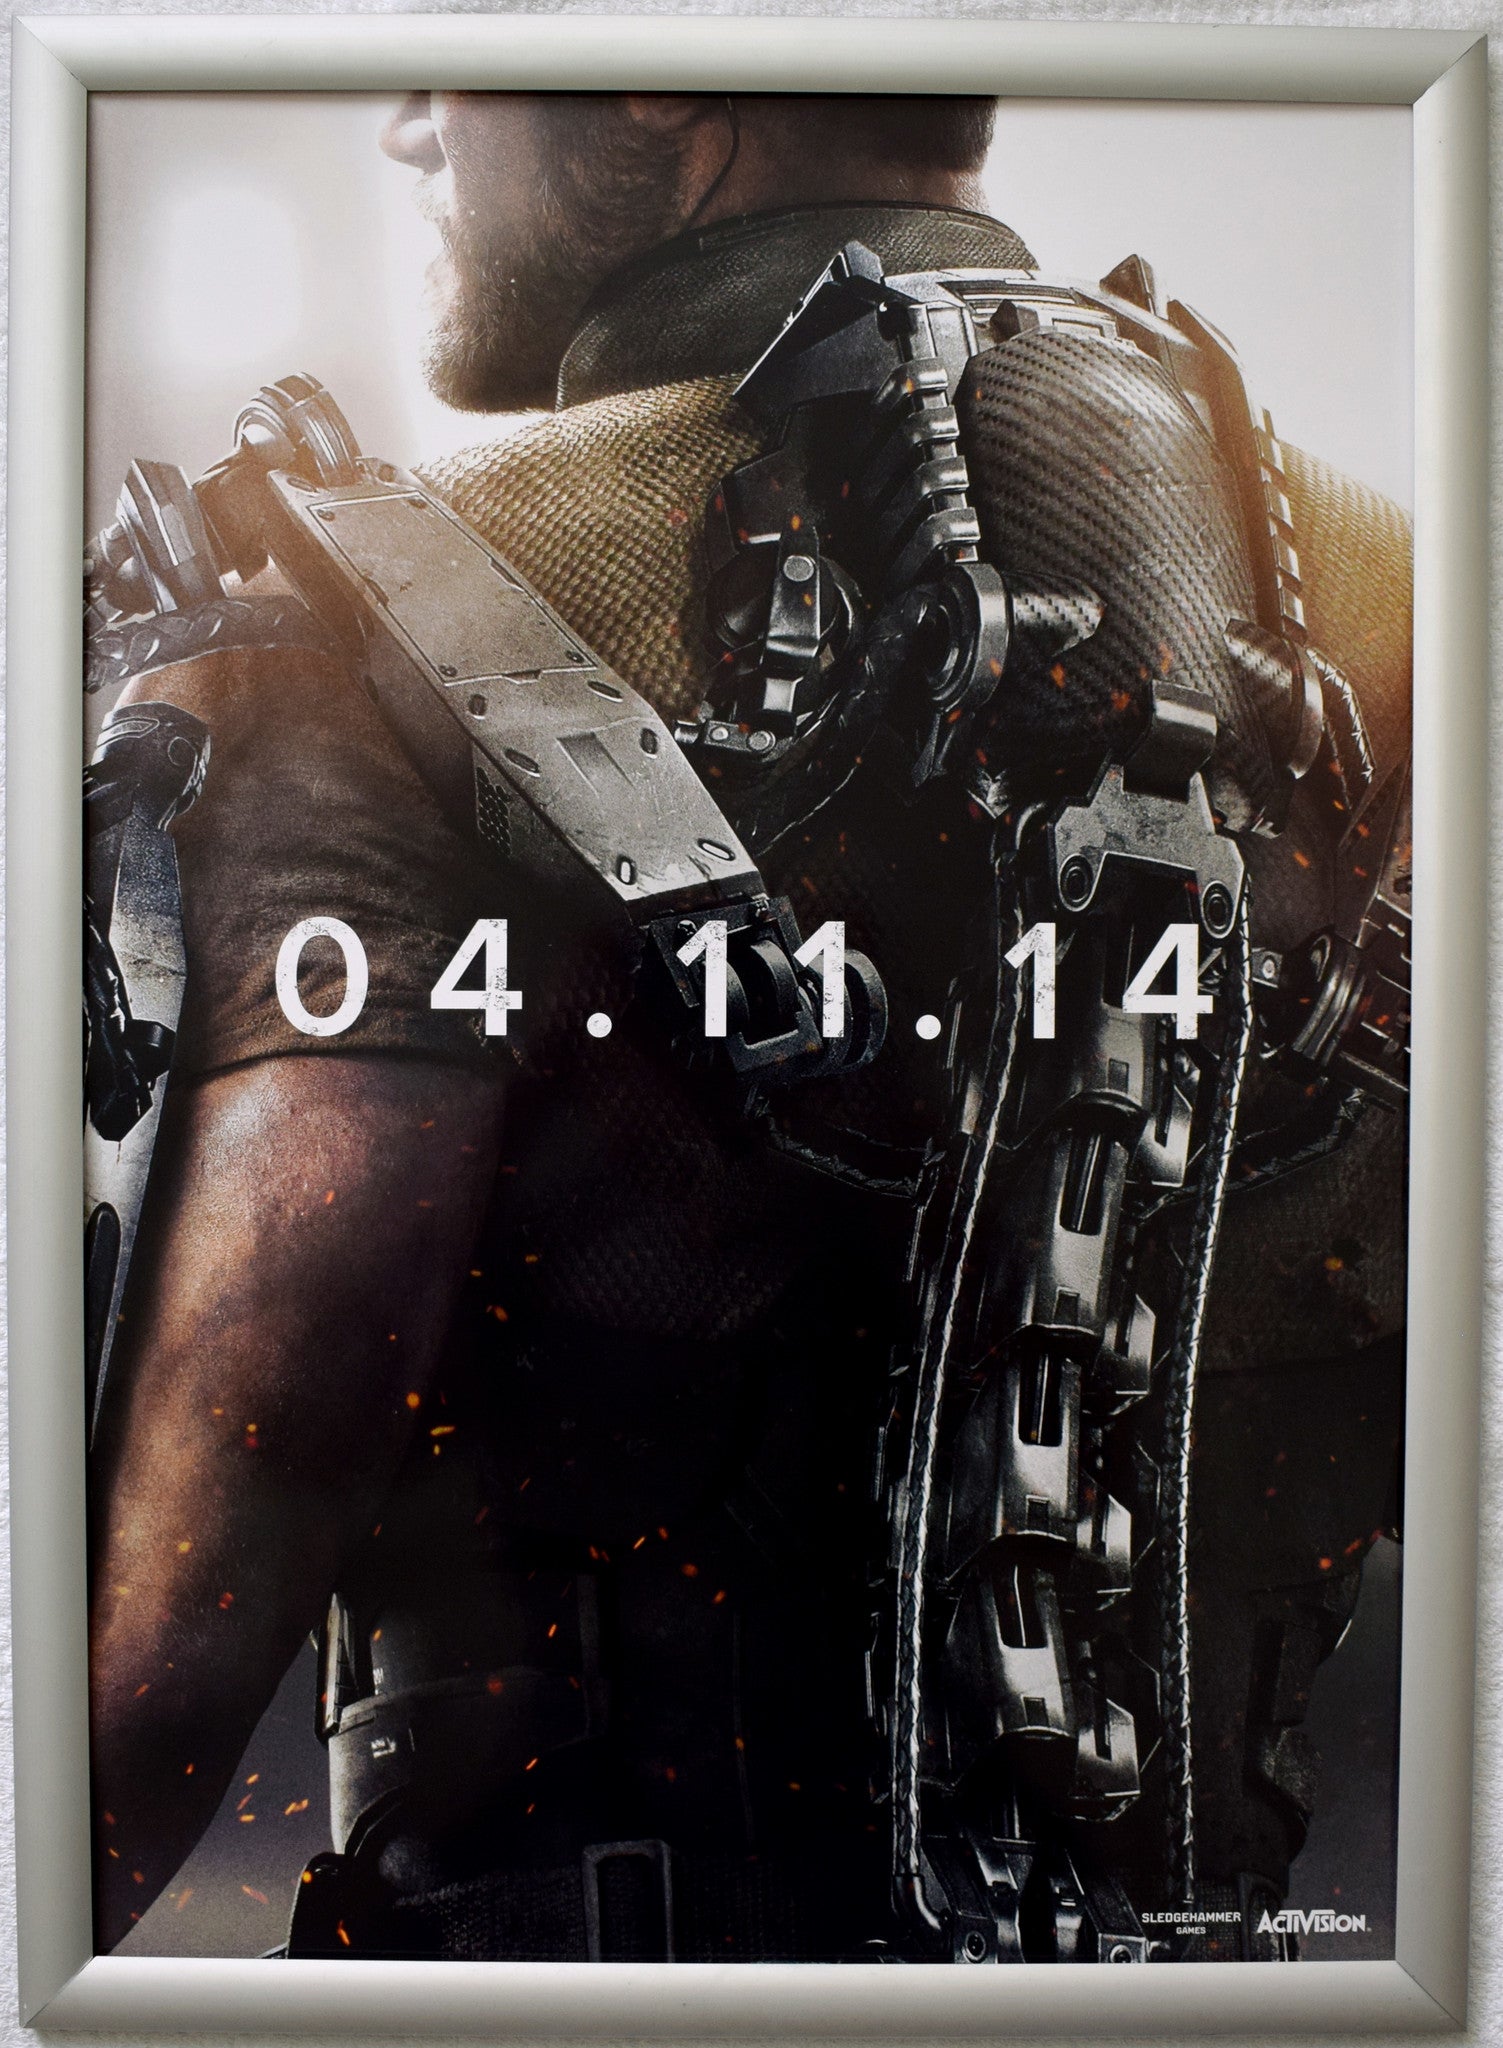 Call of Duty Advanced Warfare (A2) Promotional Poster Set of 4